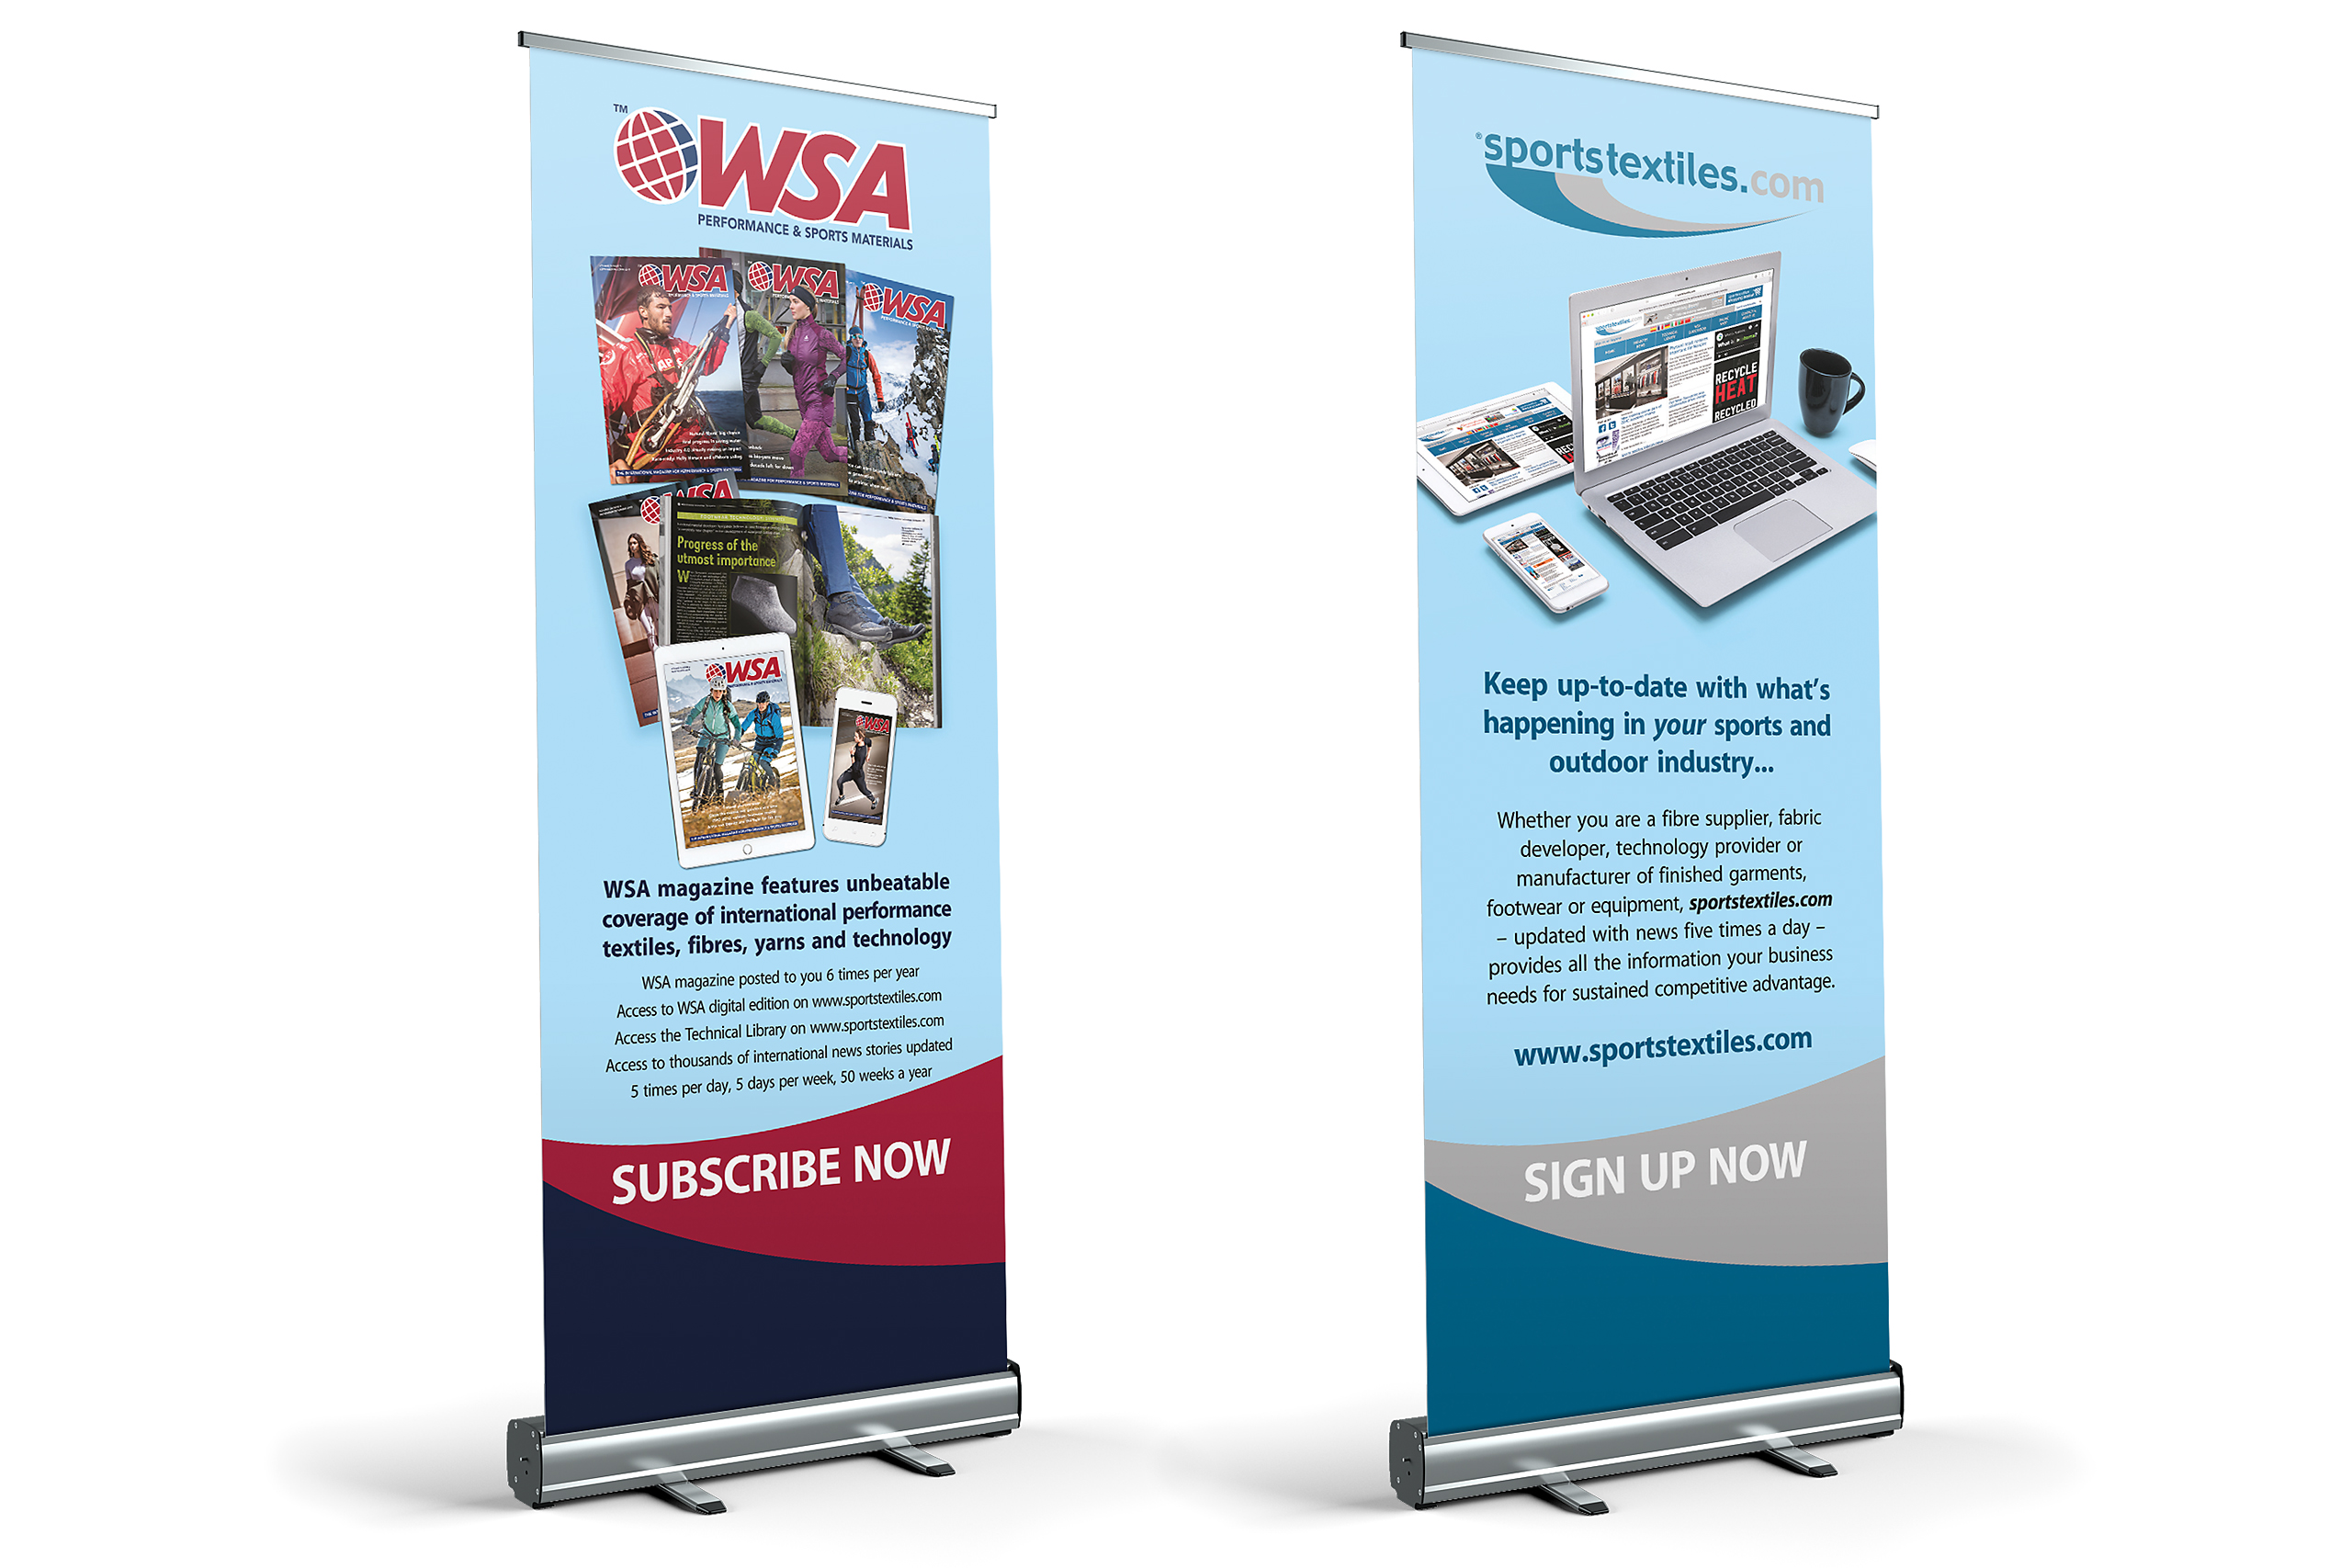 In-house pop-up banners